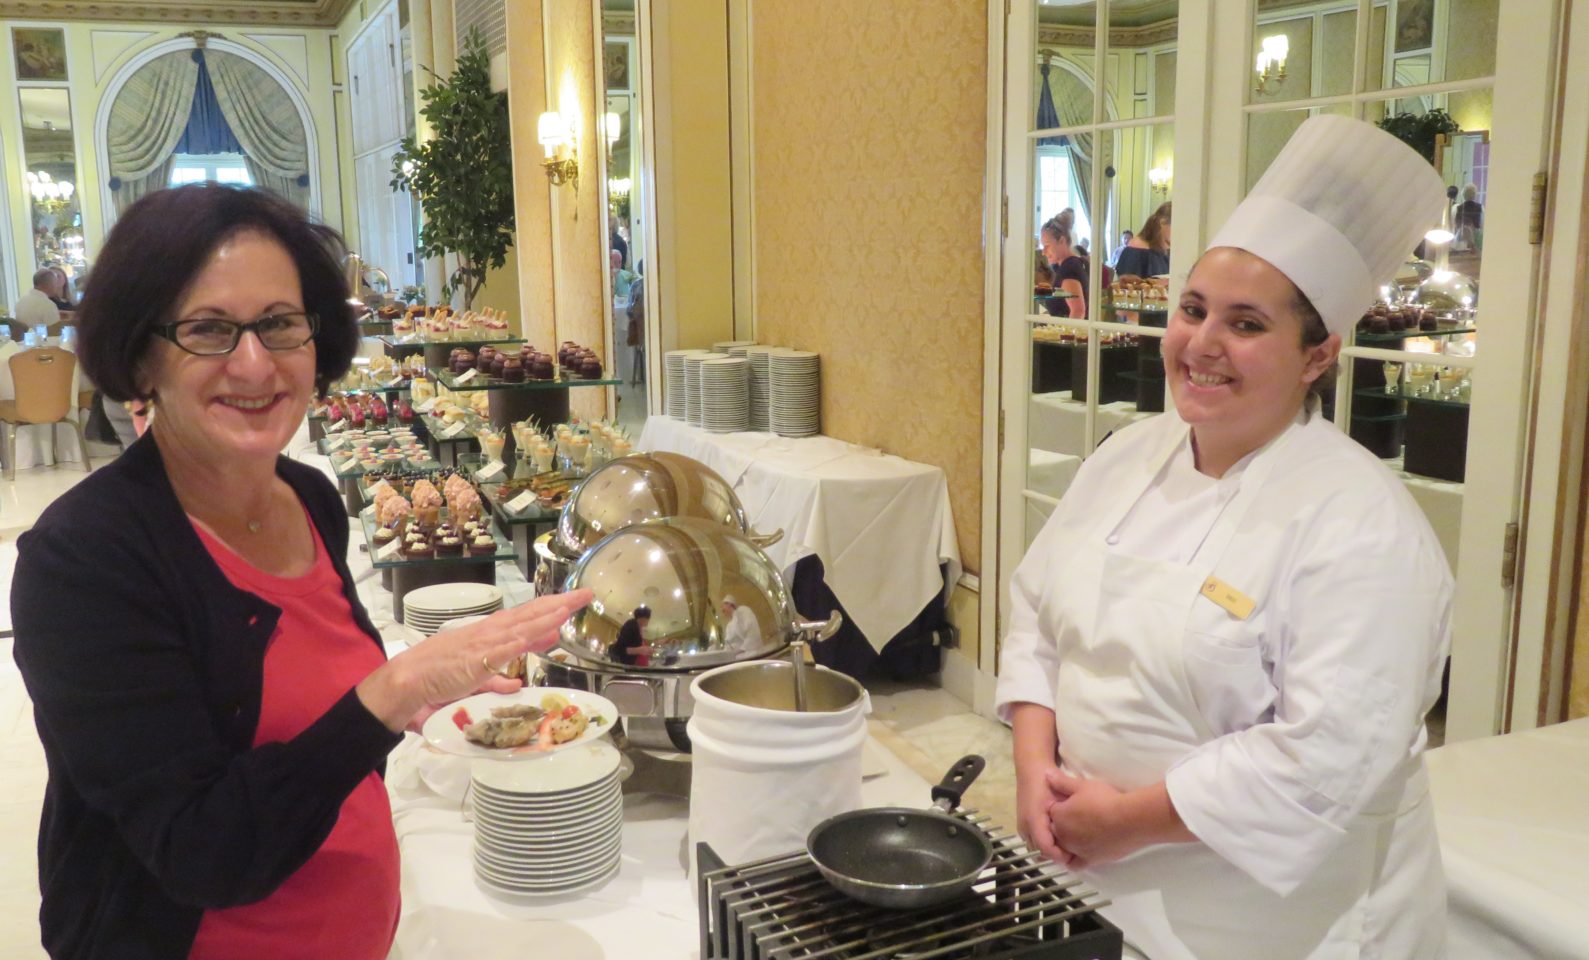 Friendly and smiling staff everywhere you turn at The Broadmoor Resort & Spa